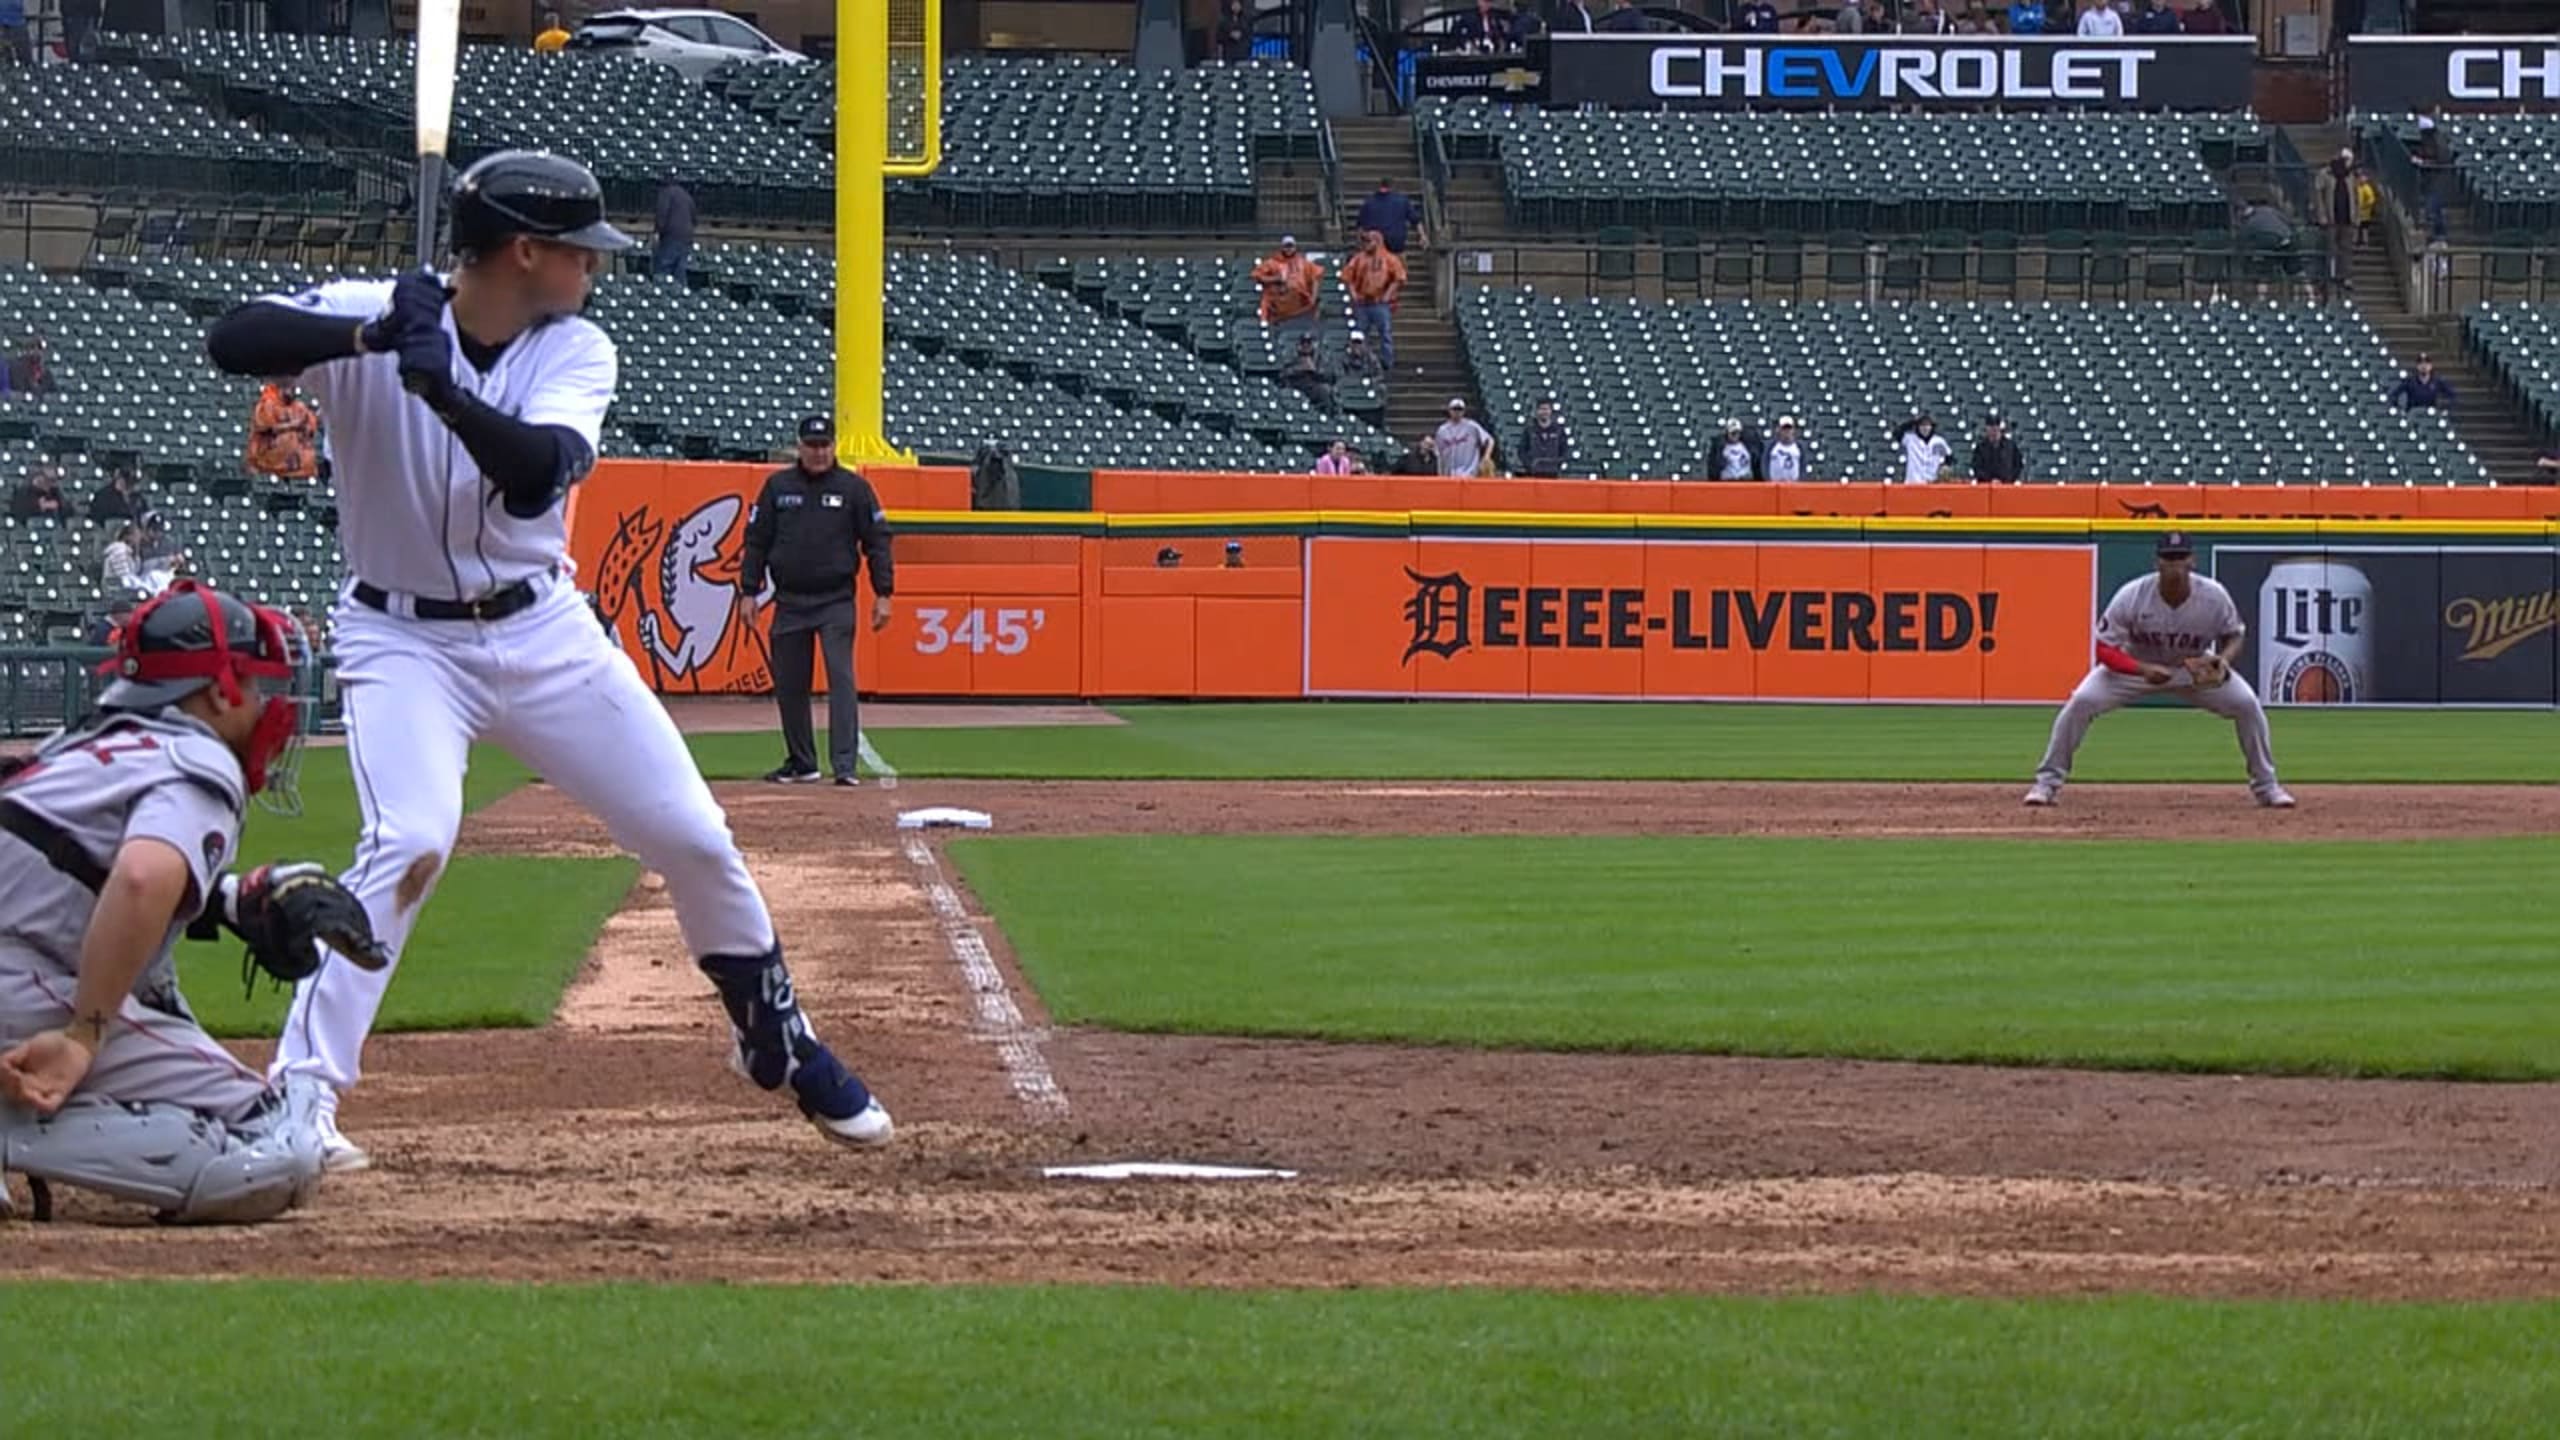 Tigers rookie Spencer Torkelson hits first career MLB home run at Comerica  Park 